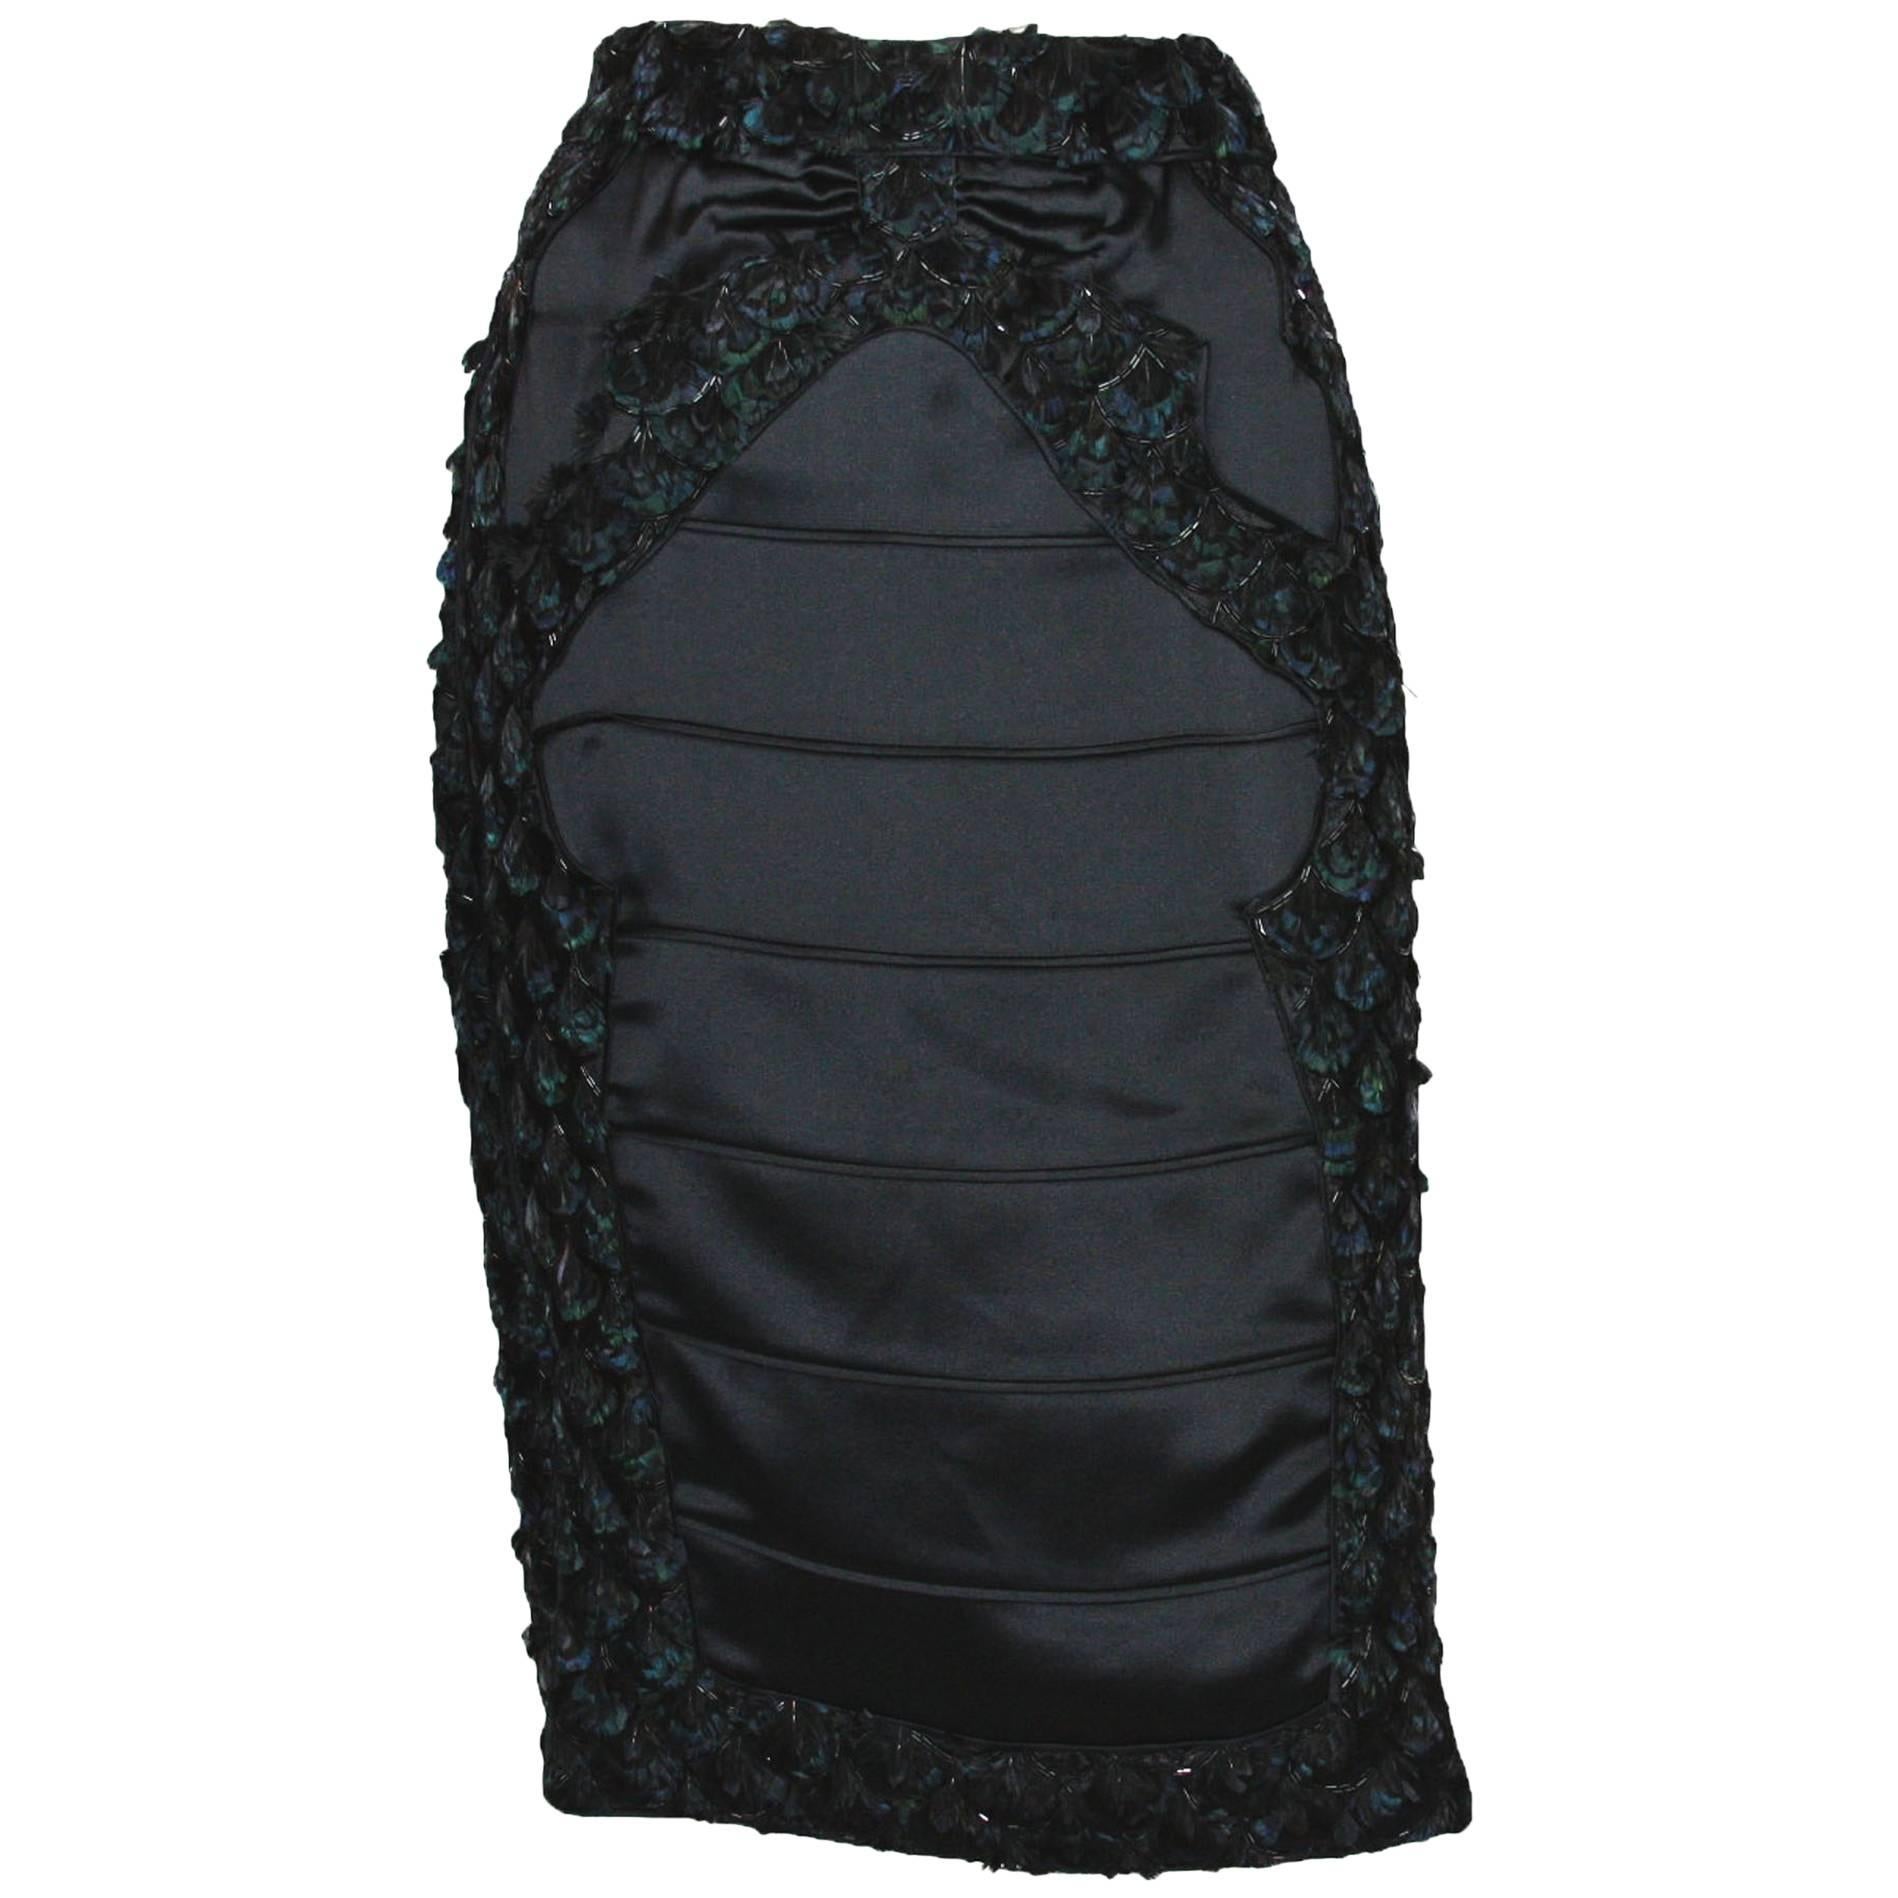 New Tom Ford for Yves Saint Laurent F/W 2004 Beaded Feather Embellished Skirt 38